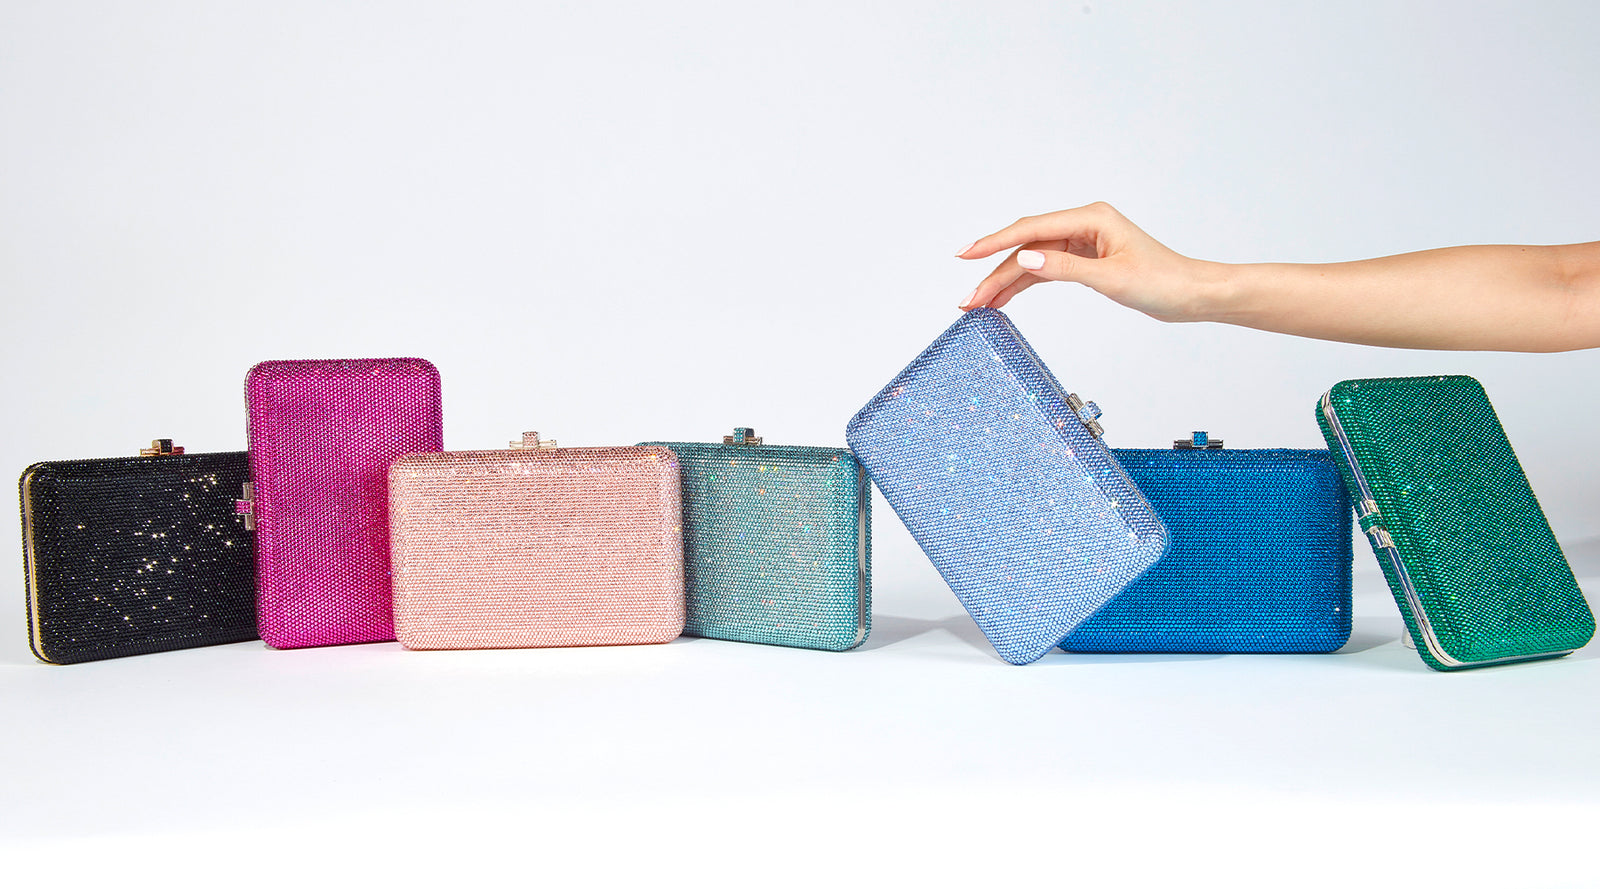 CALONGE a fashion brand in handwoven leather bags and accessories  Calonge